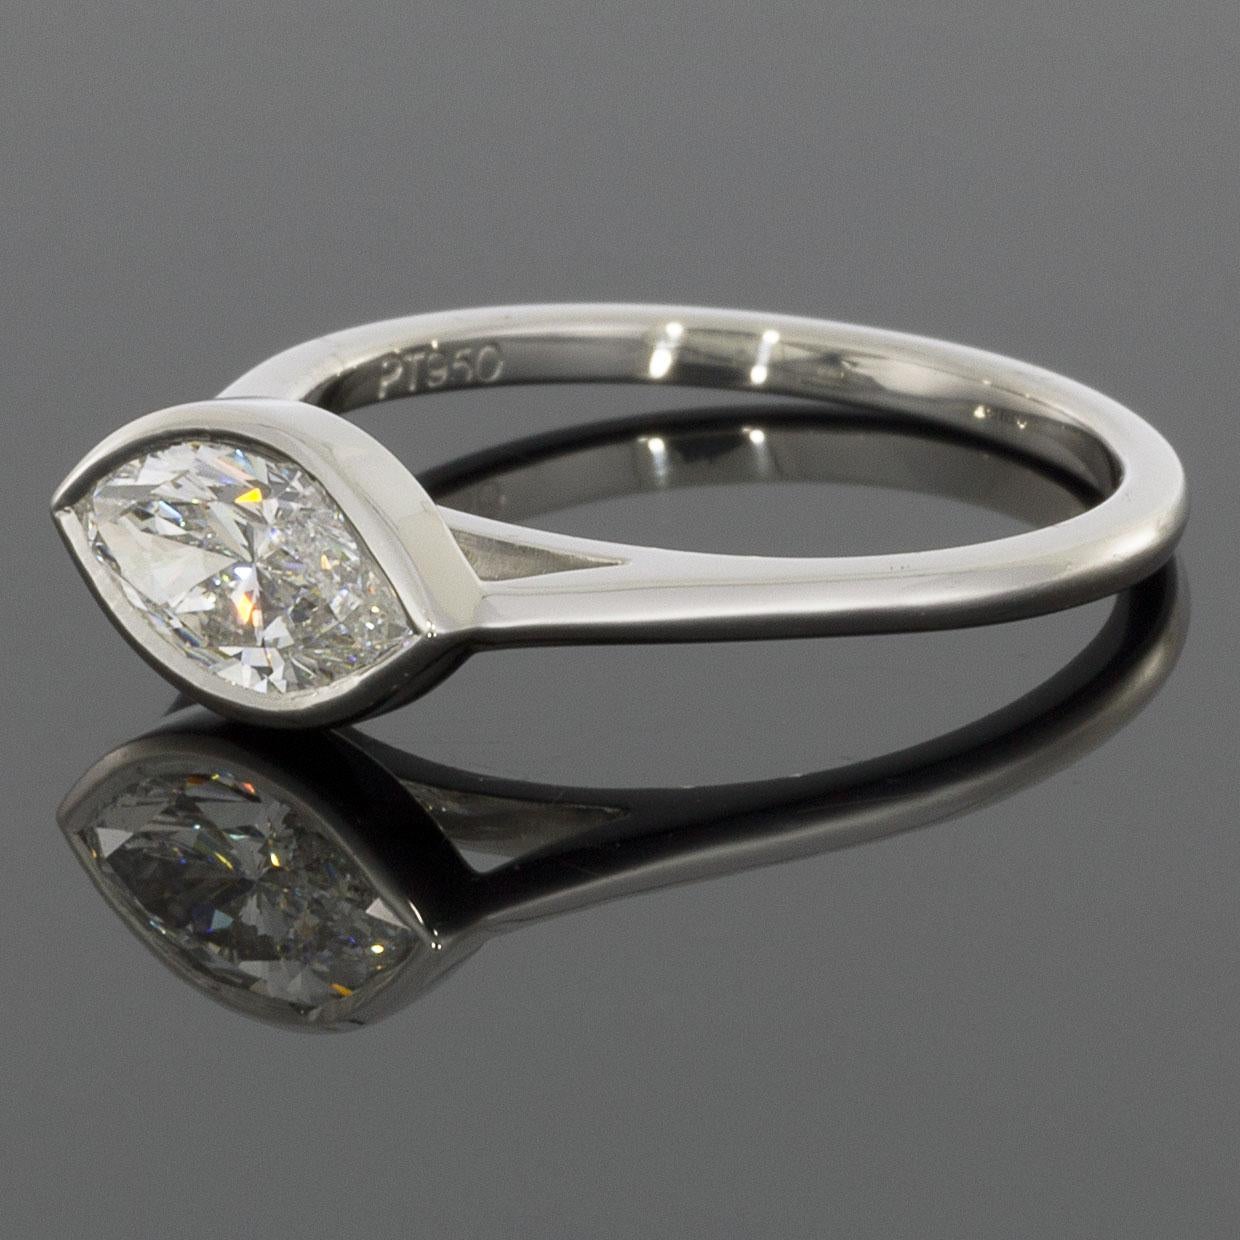 Custom Designed East-West or Horizontal Bezel Solitaire Engagement Ring - Perfectly fits the GIA certified marquise brilliant cut center diamond & allows any straight wedding band to fit snug & flush!

Item Details:
Estimated Retail $9,000.00
Metal